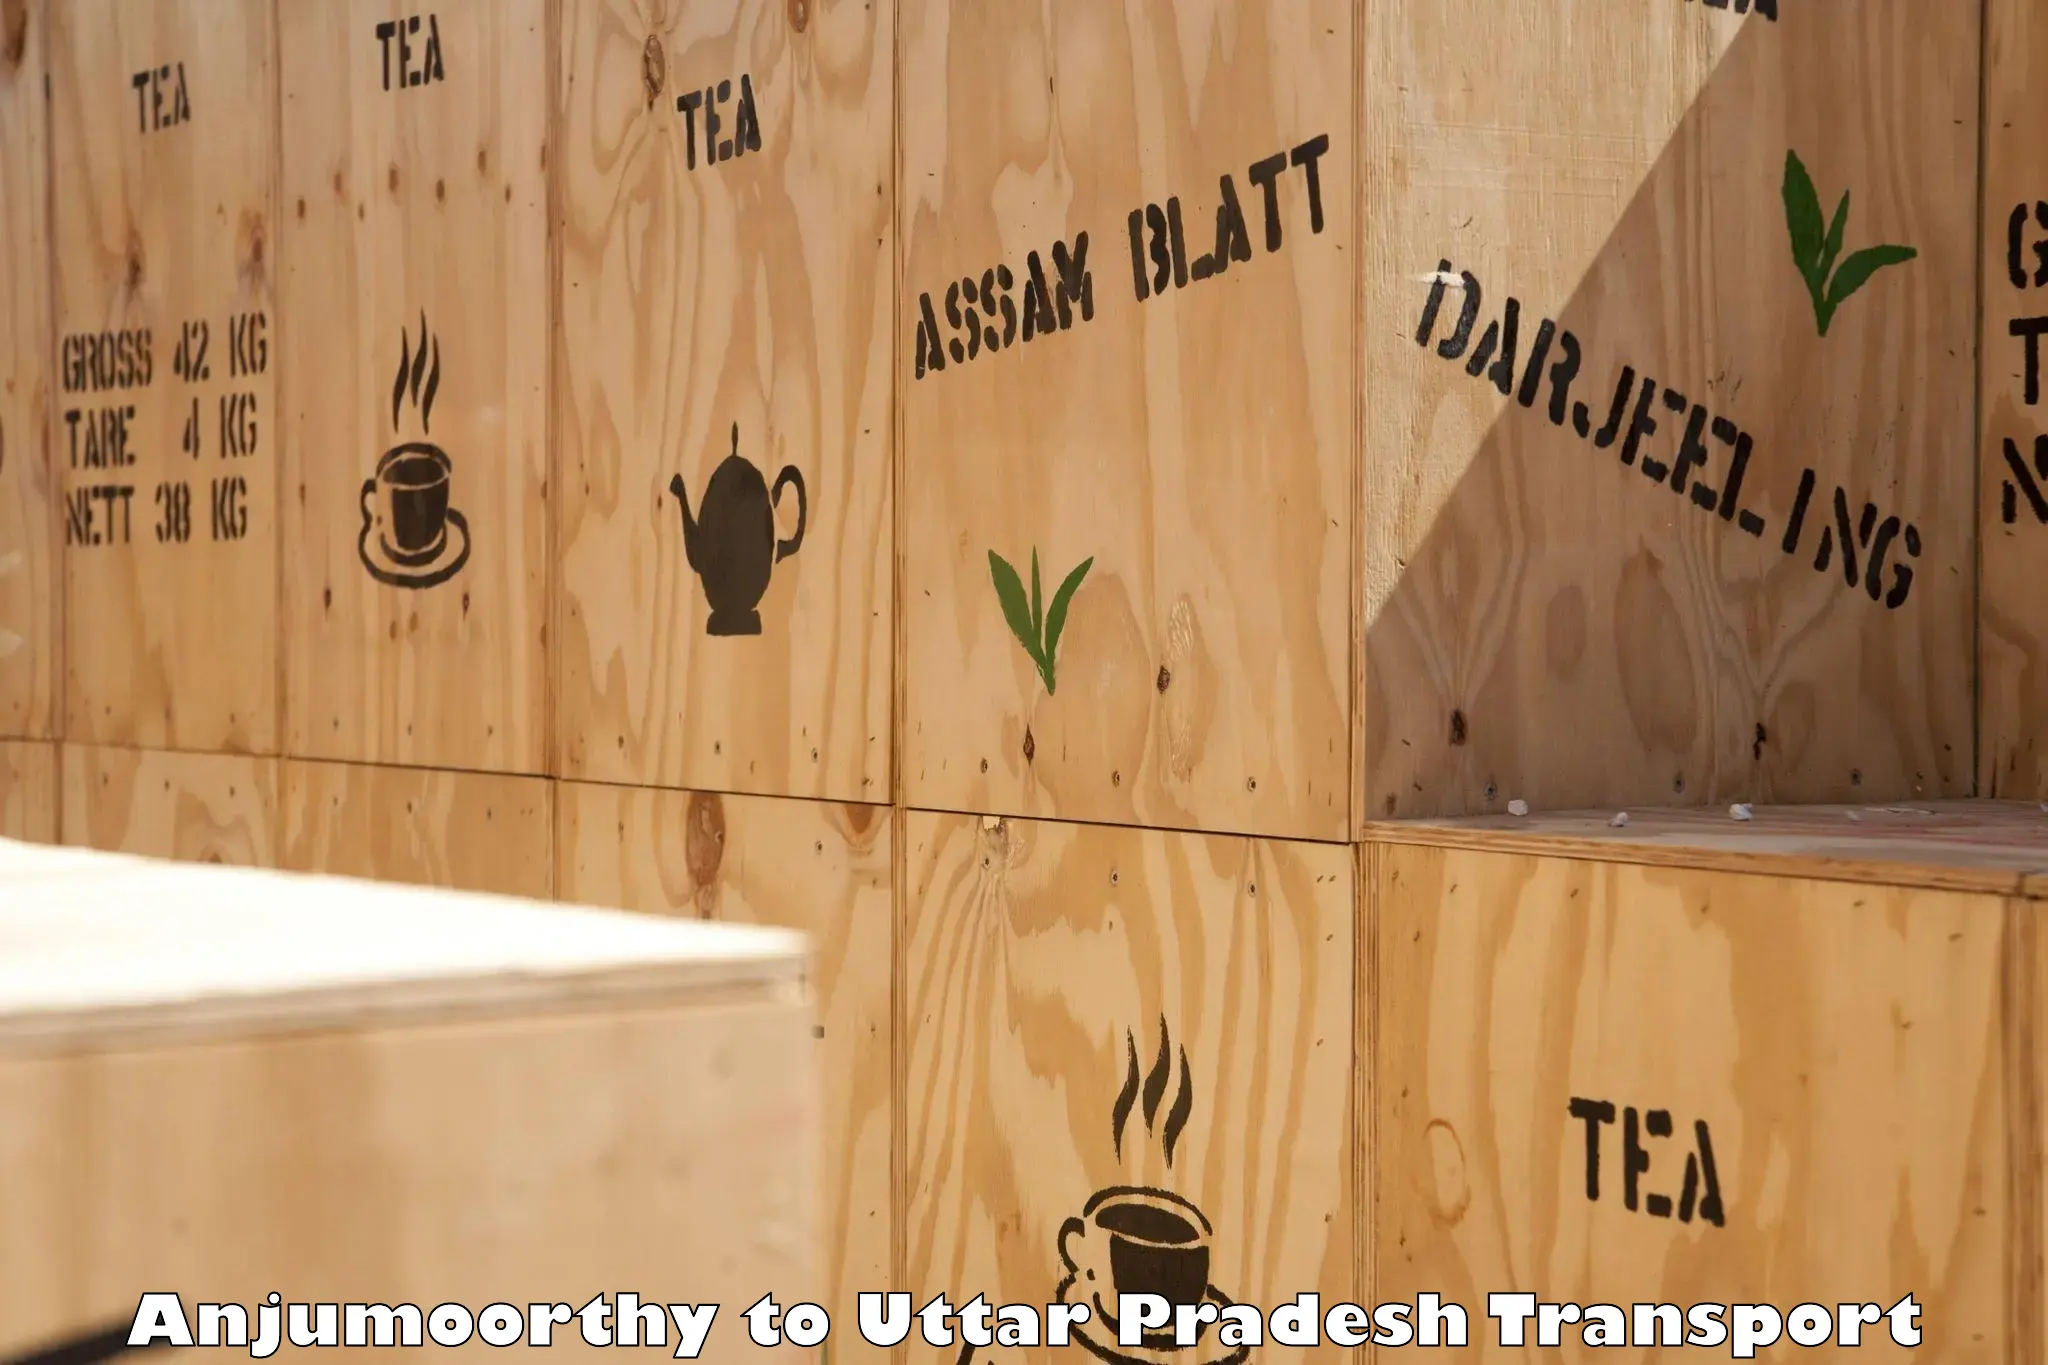 Container transportation services Anjumoorthy to Sonbhadra